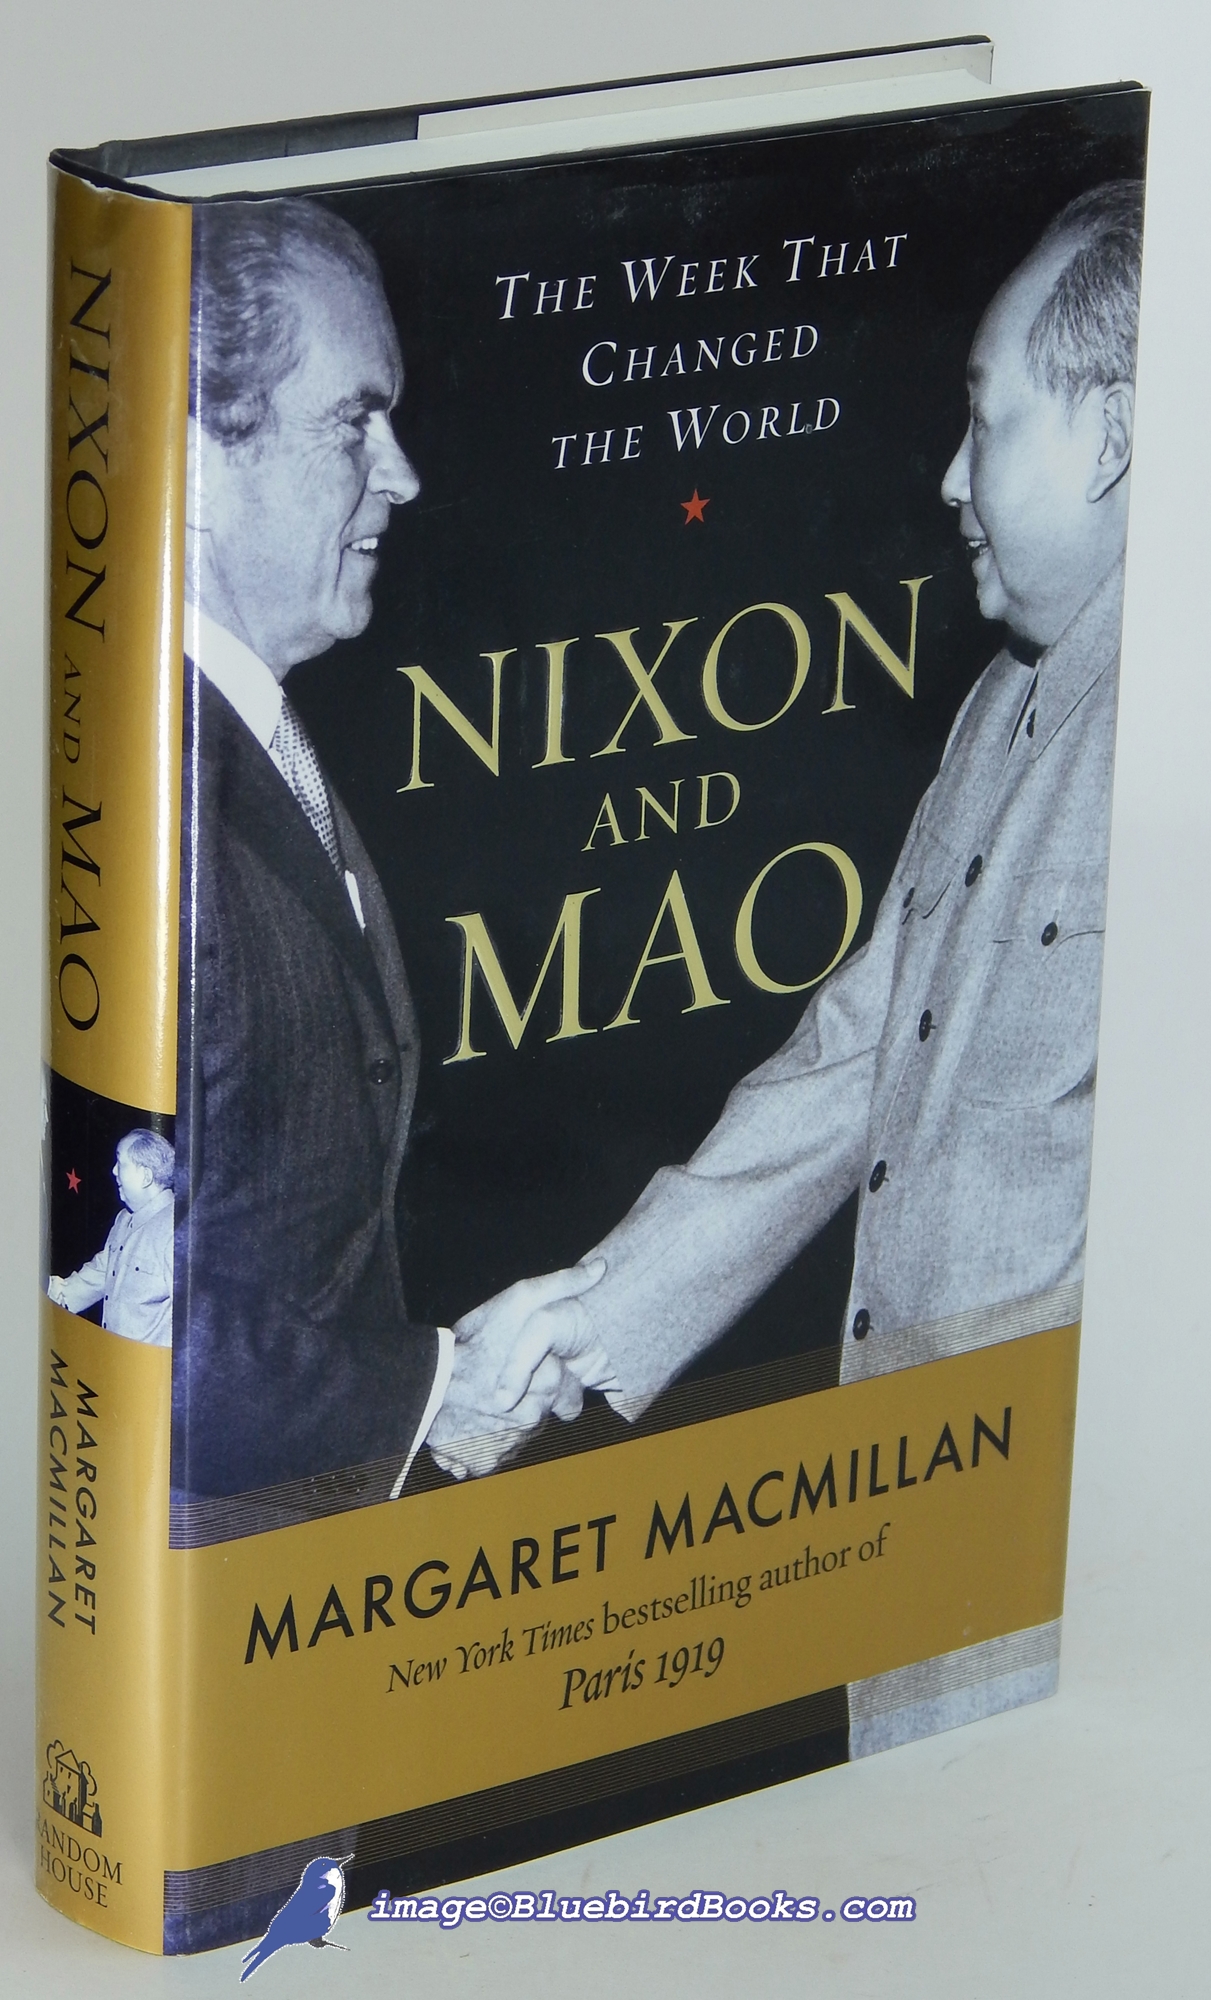 MACMILLAN, MARGARET - Nixon and Mao: The Week That Changed the World